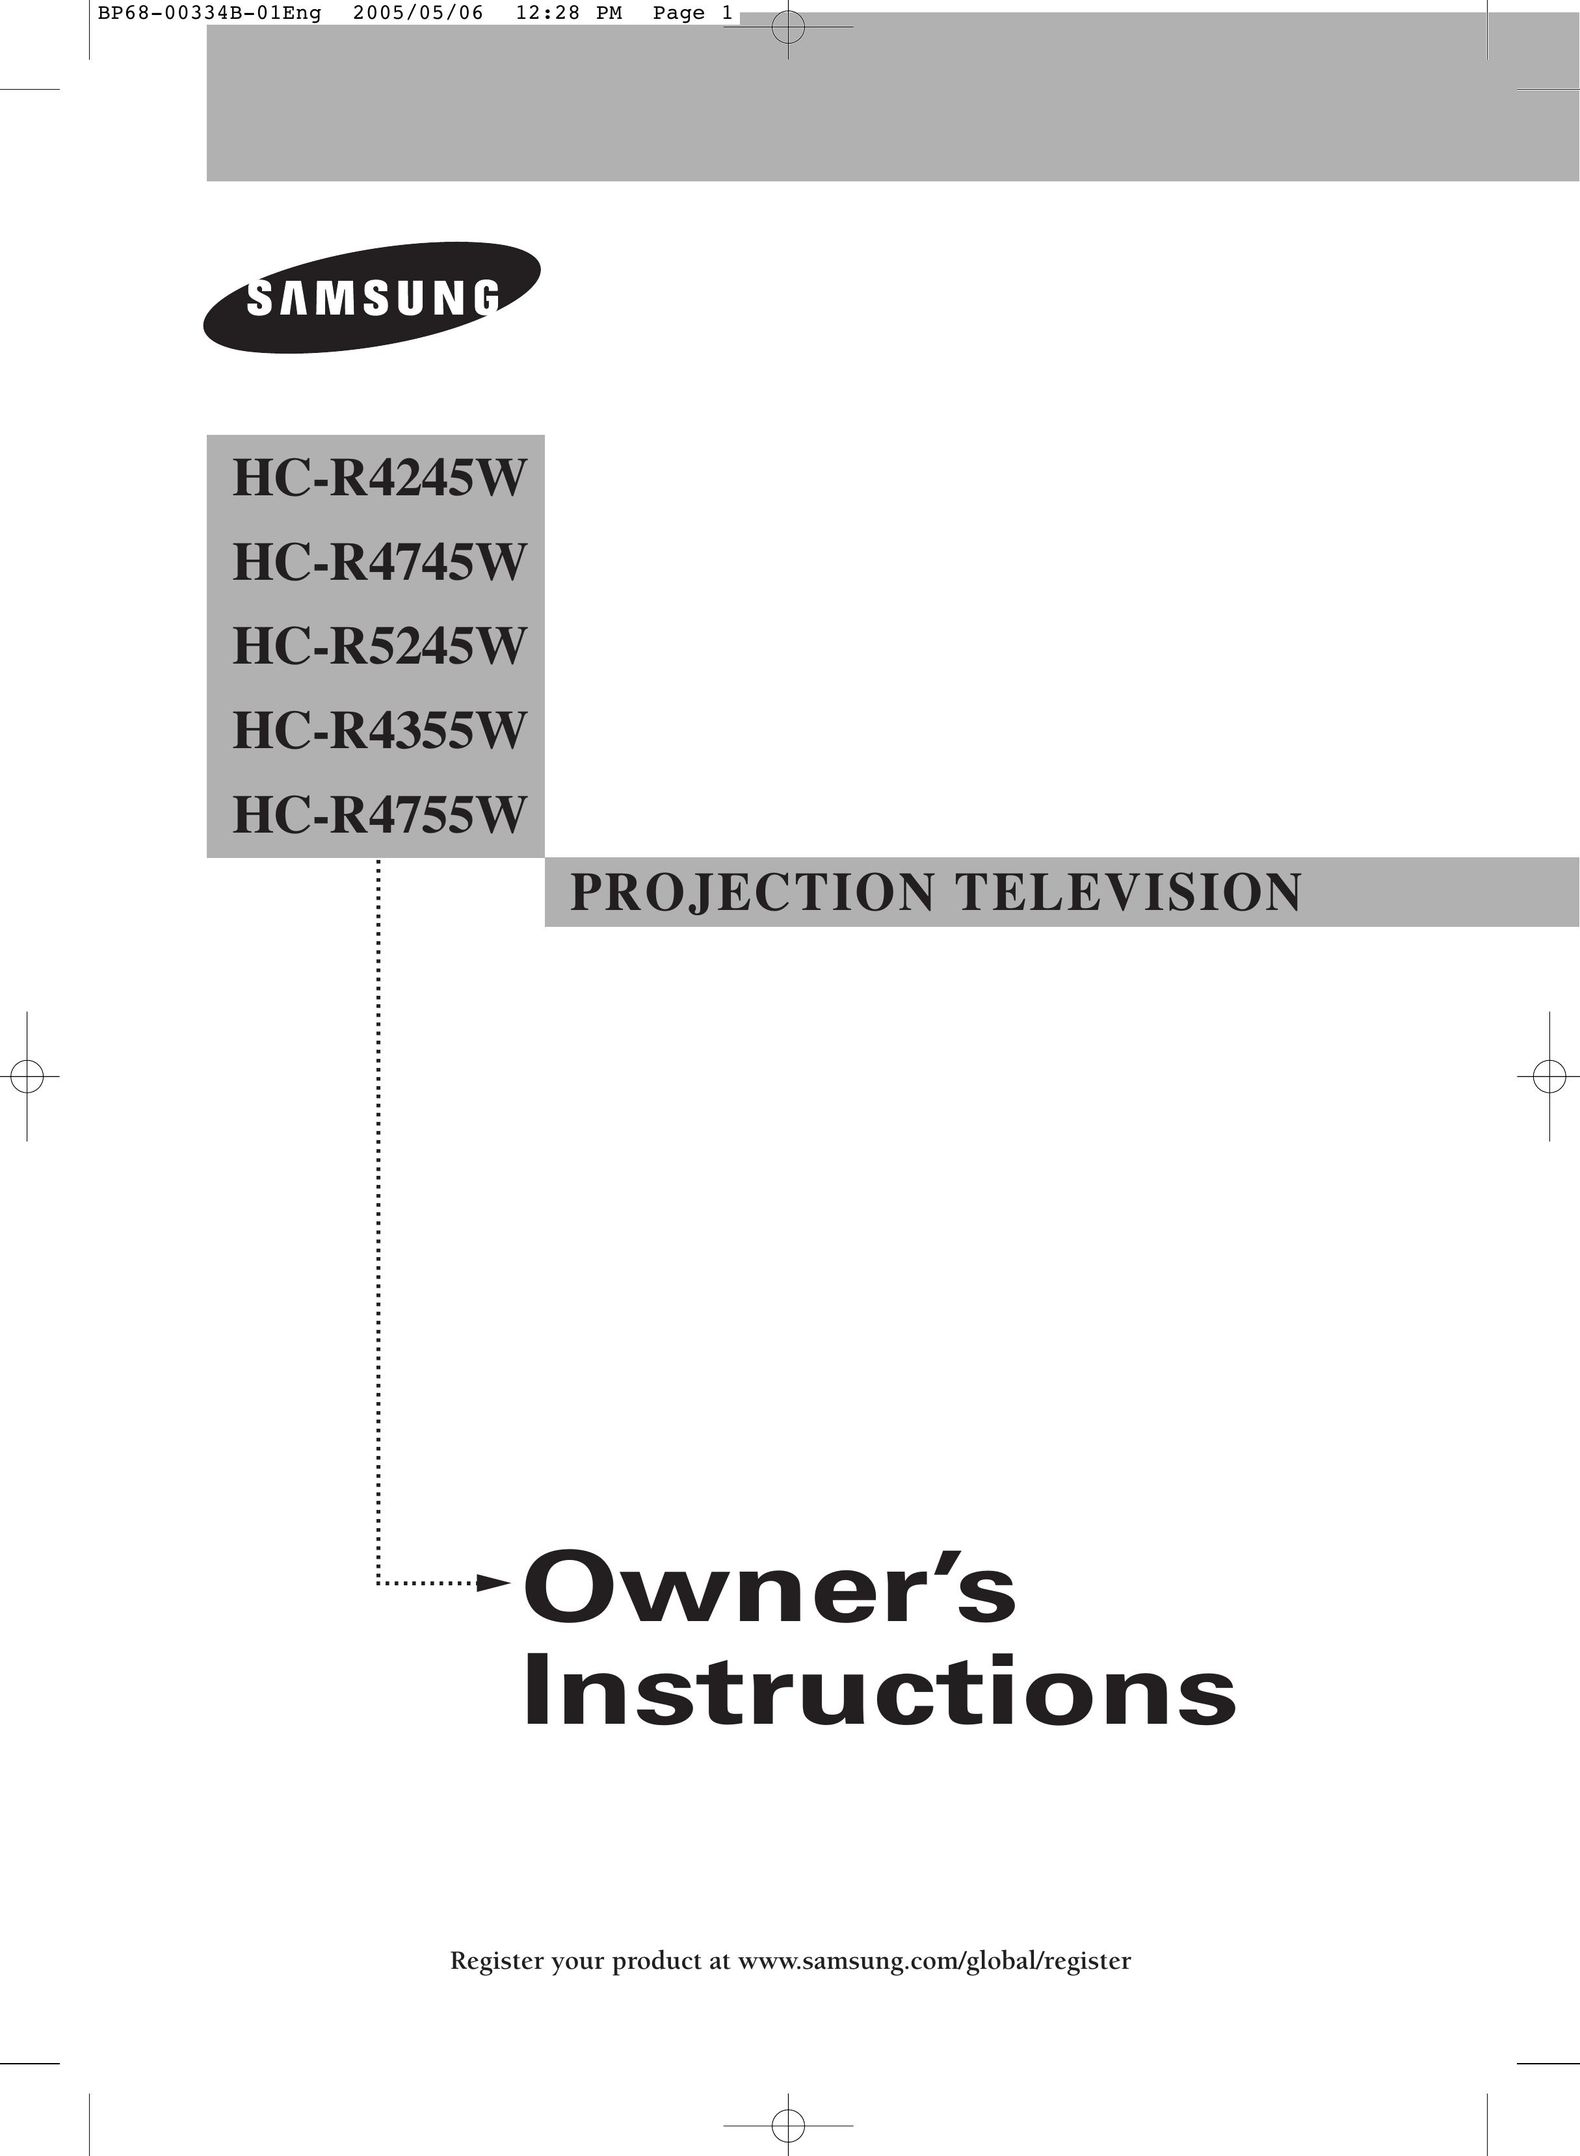 Samsung HC-R4355W Projection Television User Manual